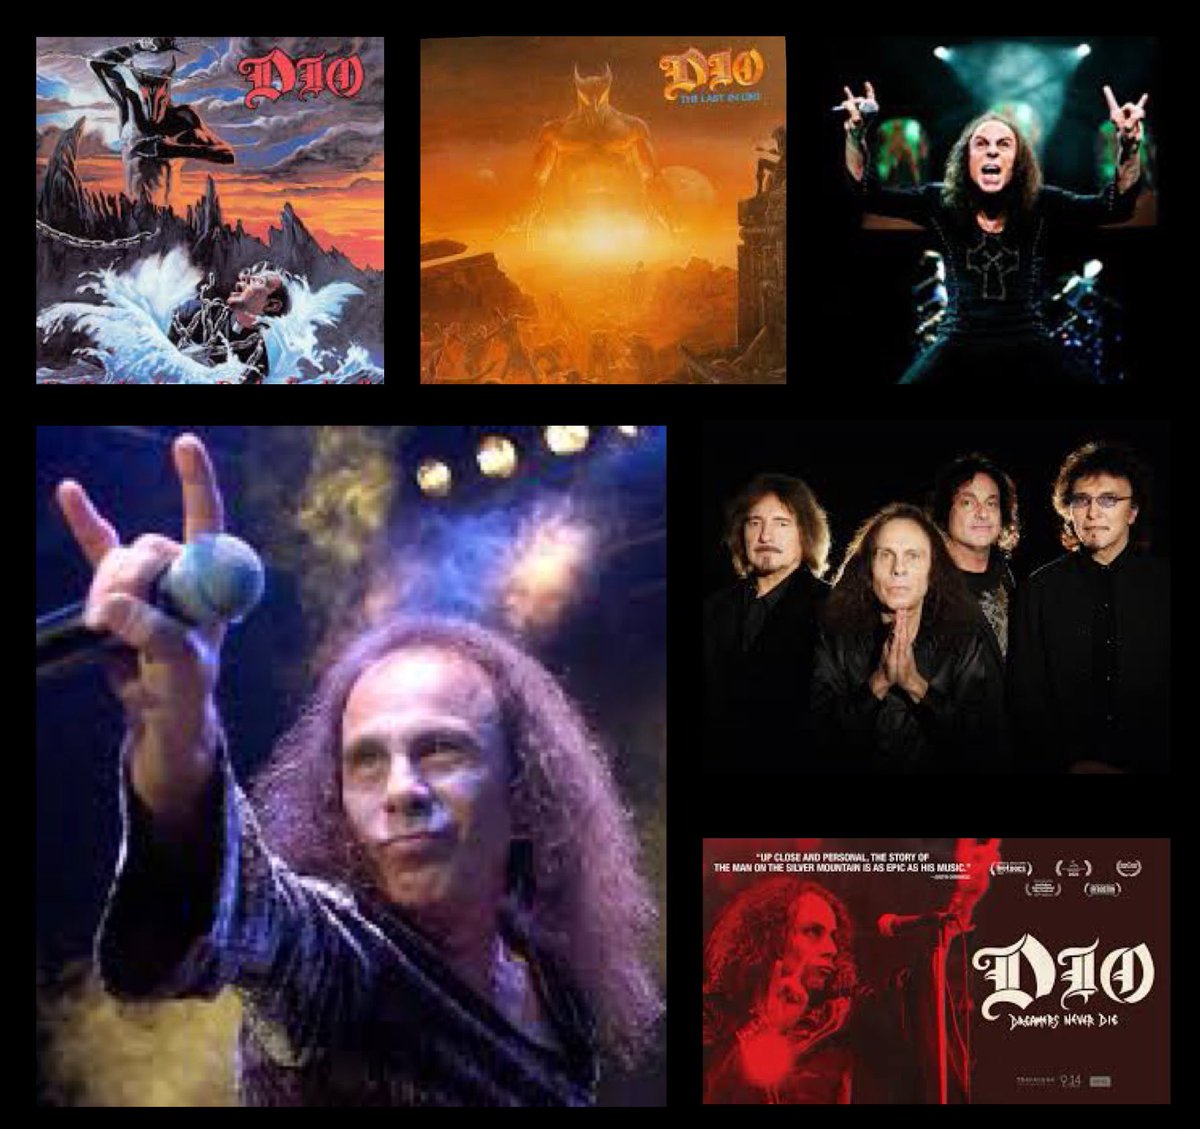 UAWIL 181 is our track x track review of The Last in Line as it turns 40: pdst.fm/e/traffic.mega… Hear all our @OfficialRJDio episodes!! Holy Diver: pdst.fm/e/traffic.mega… Dreamers Never Die: pdst.fm/e/traffic.mega… Dio in Sabbath: pdst.fm/e/traffic.mega… #ronniejamesdio